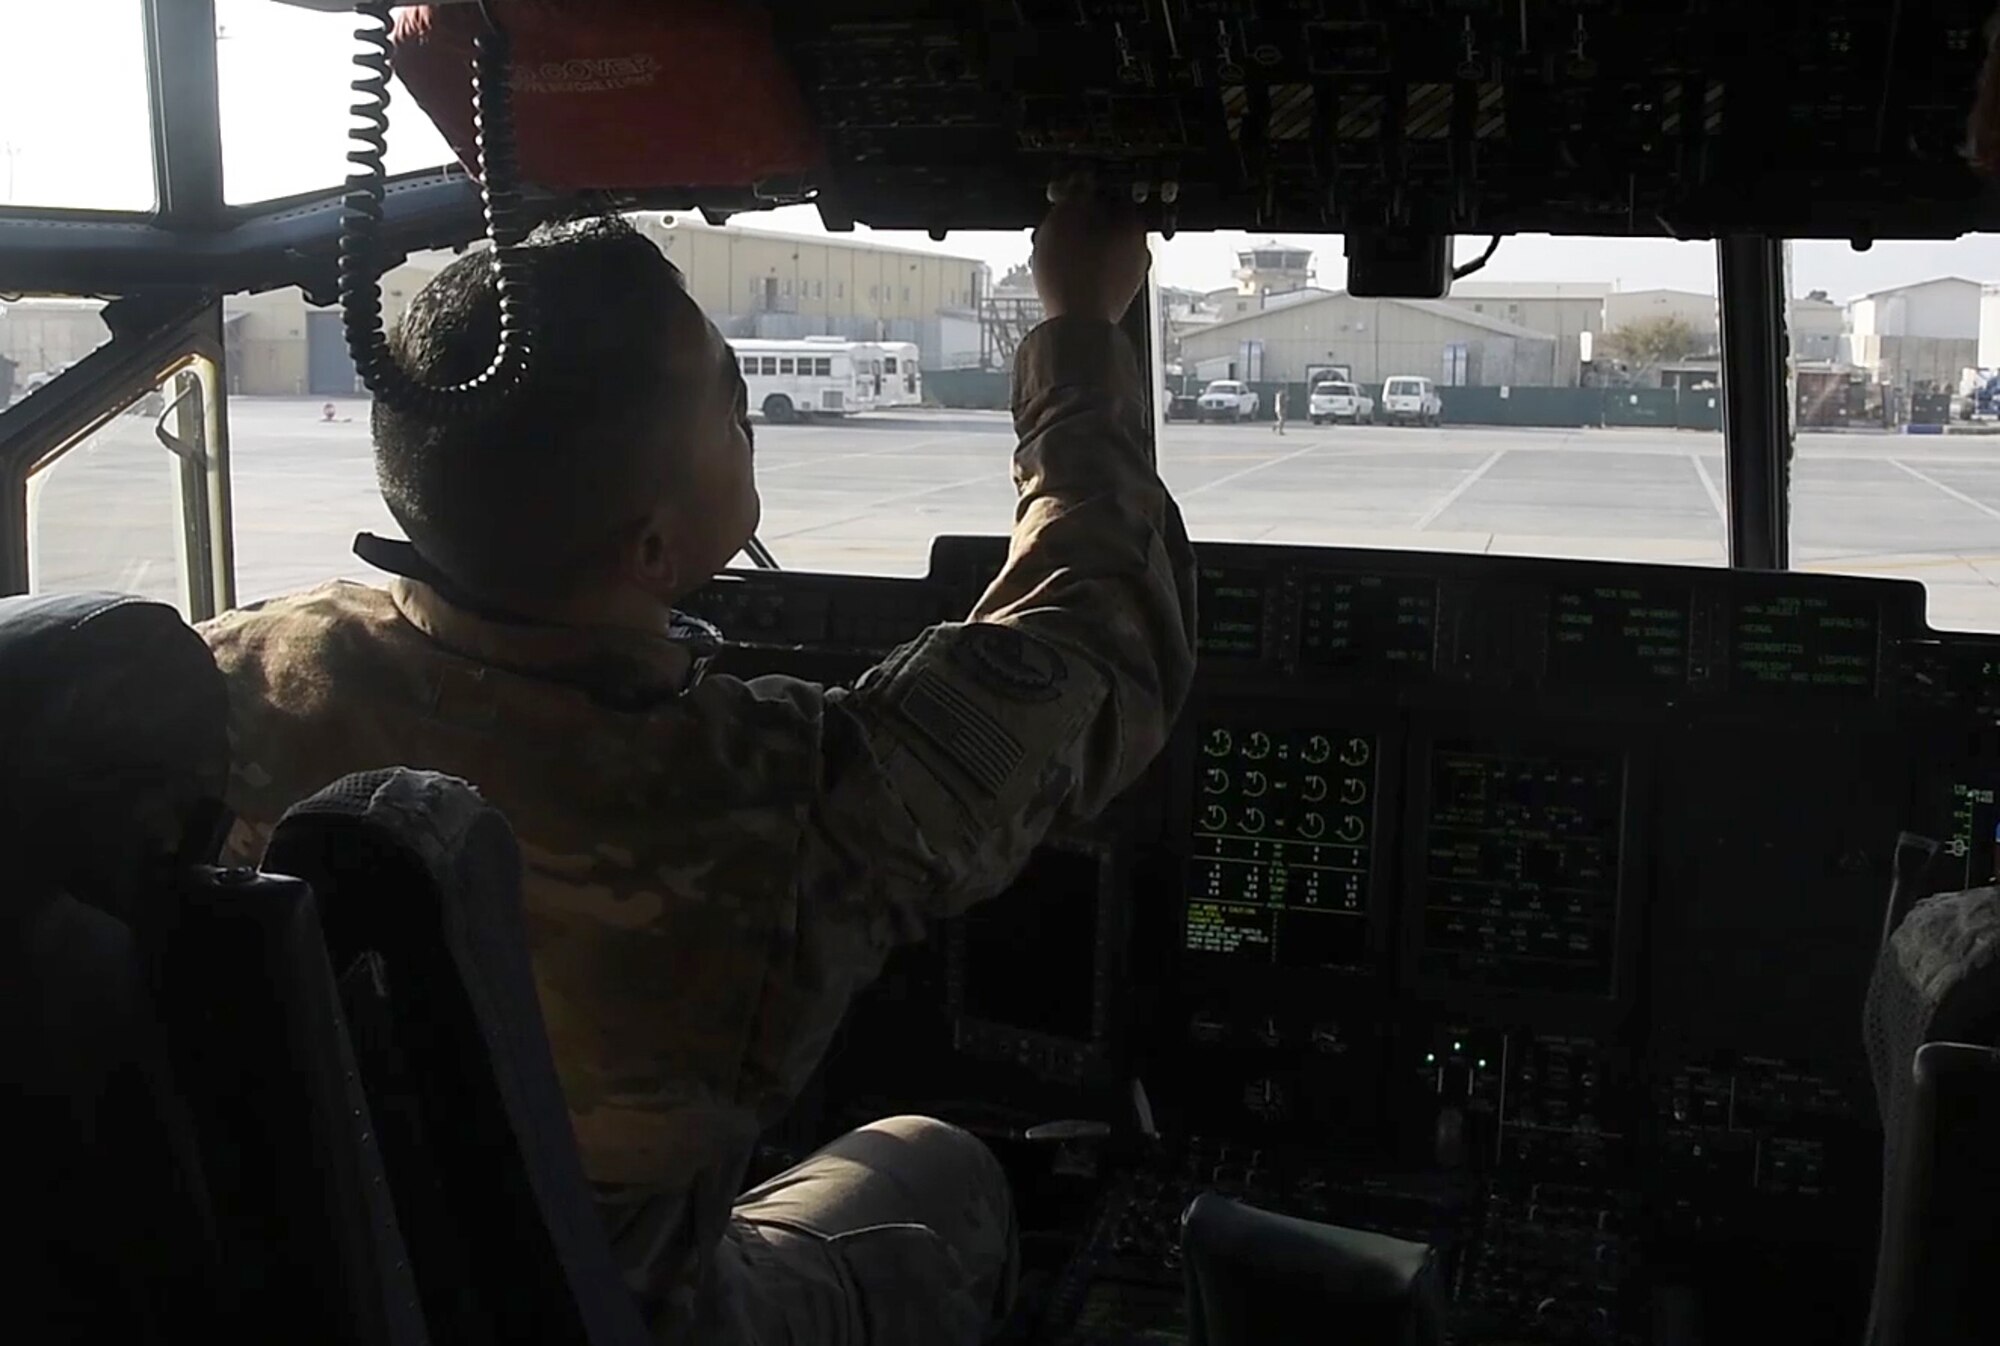 Staff Sgt. Anthony Single, 455th Expeditionary Aircraft Maintenance Squadron crew chief, resets flight controls for the pilots Dec. 5, 2017 at Bagram Airfield, Afghanistan.